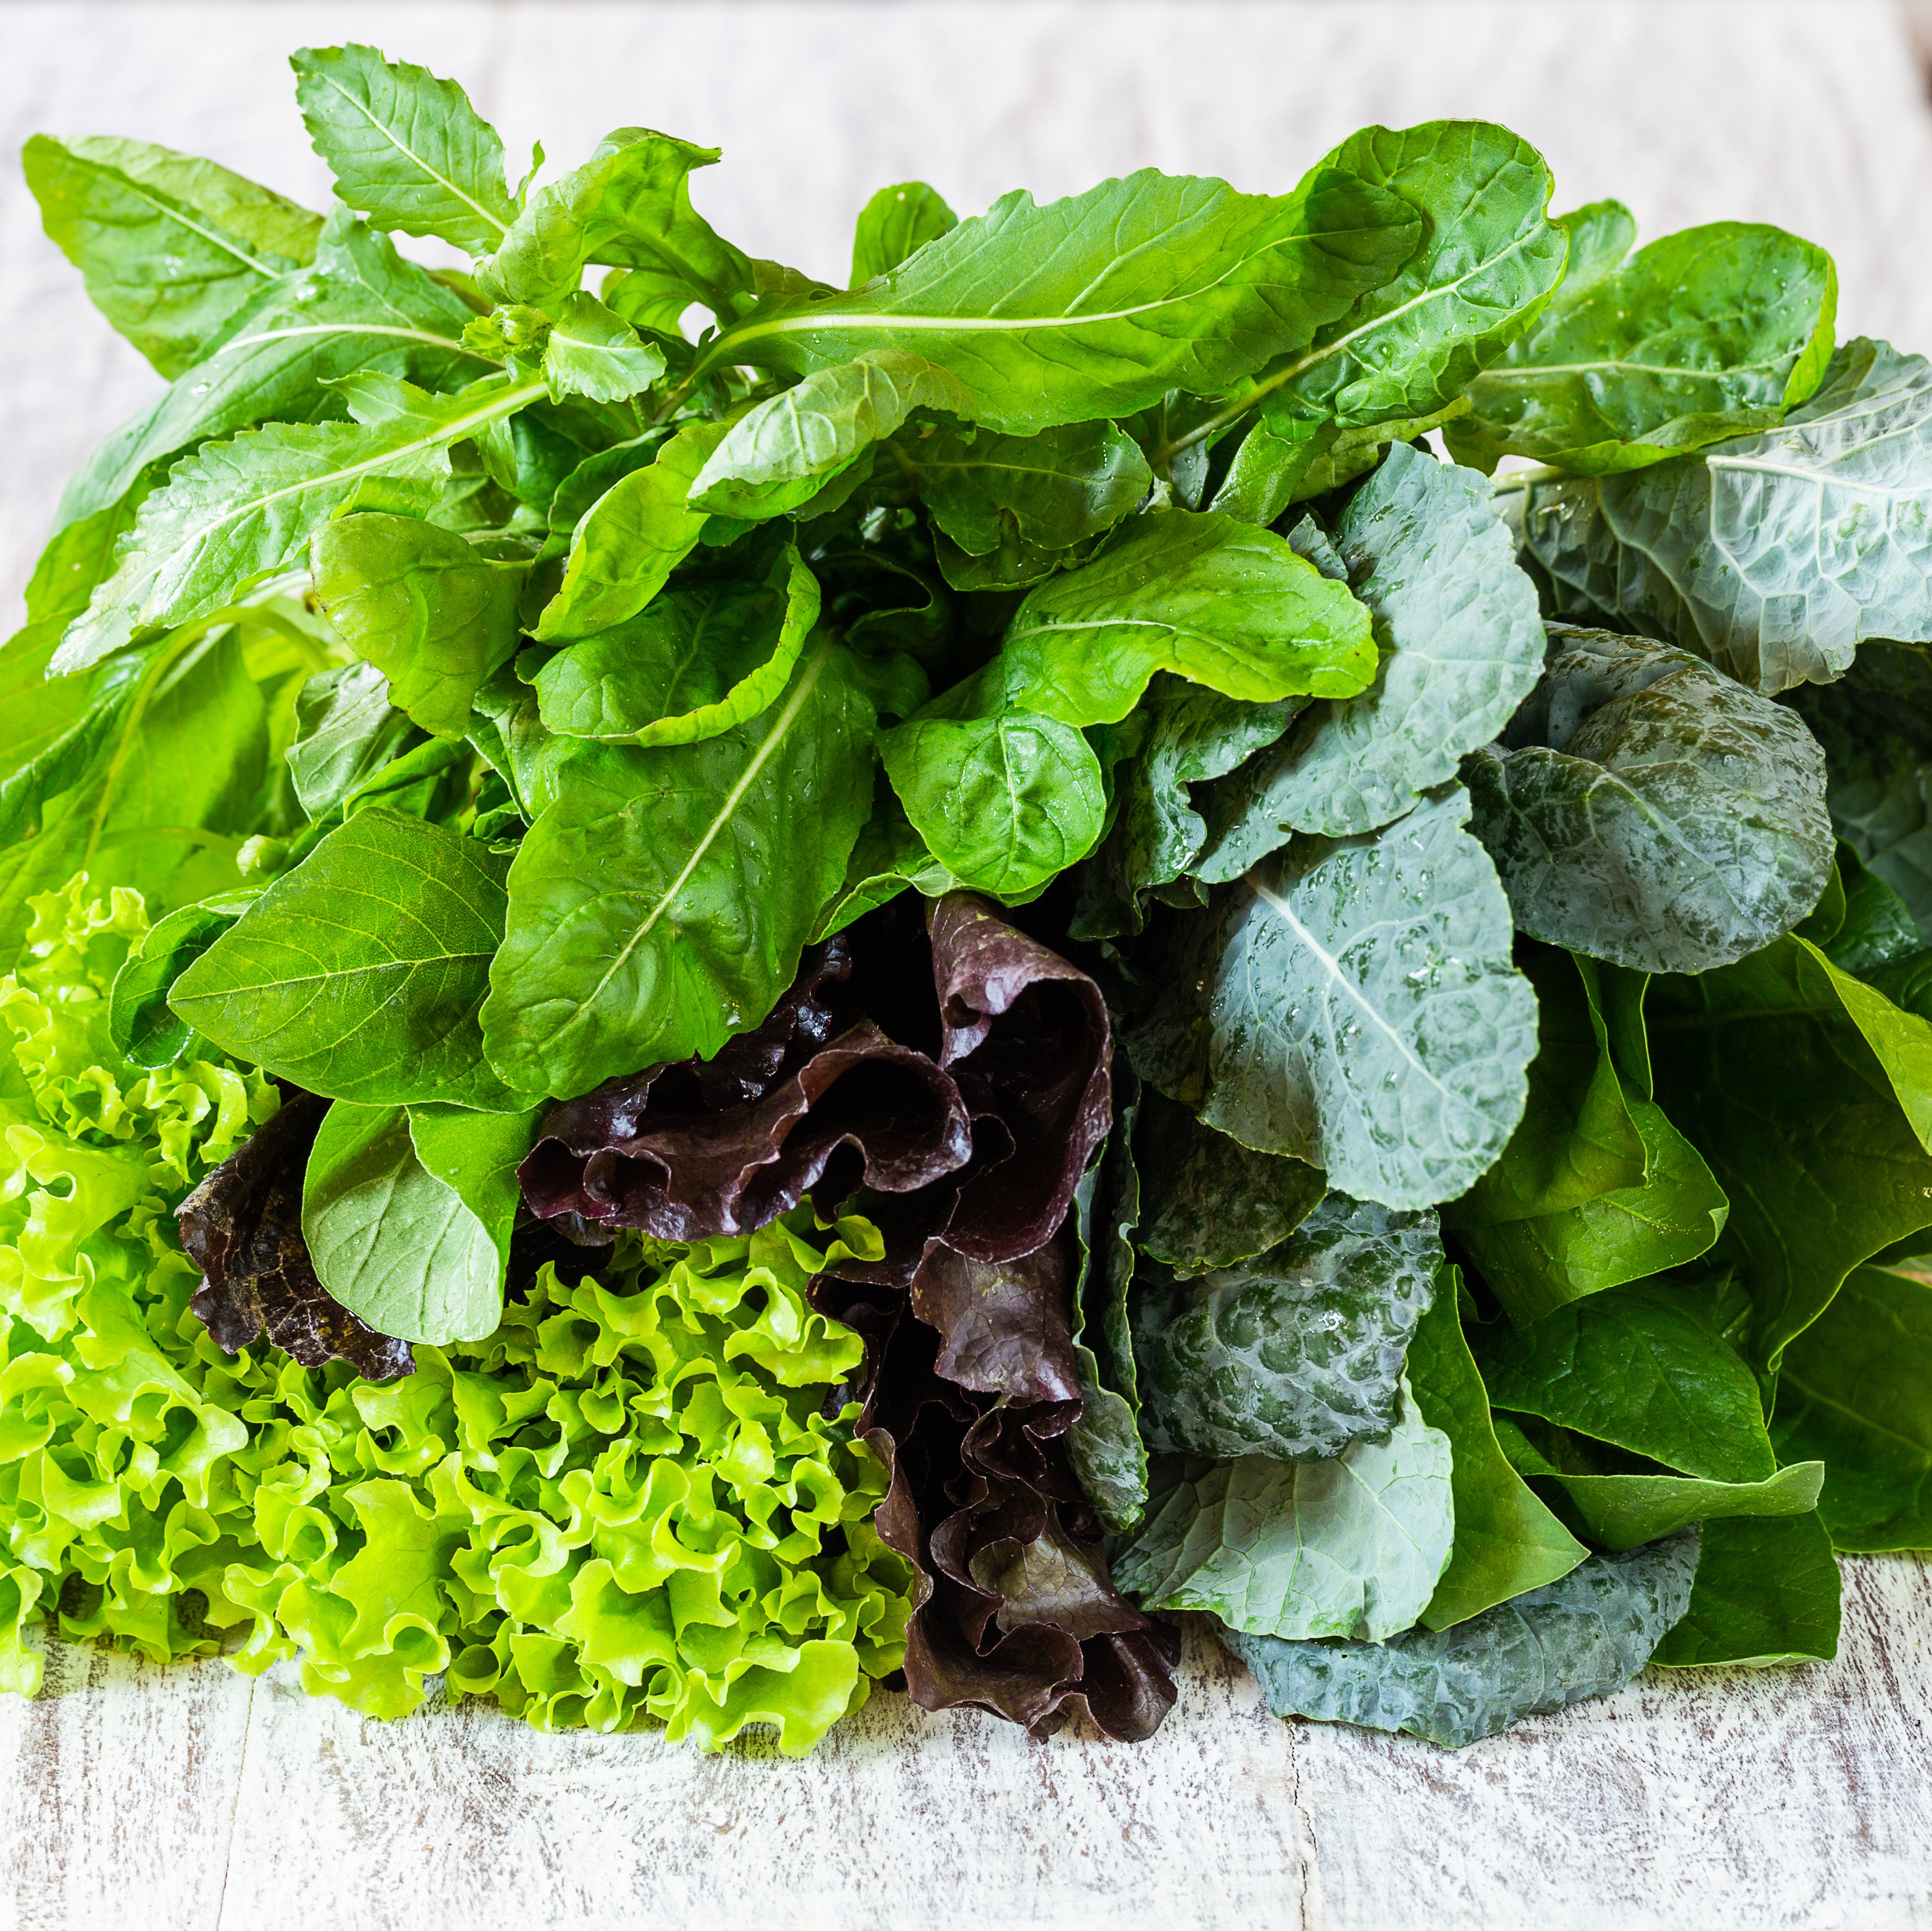 Rocket, kale and spinach are other common salad leaves